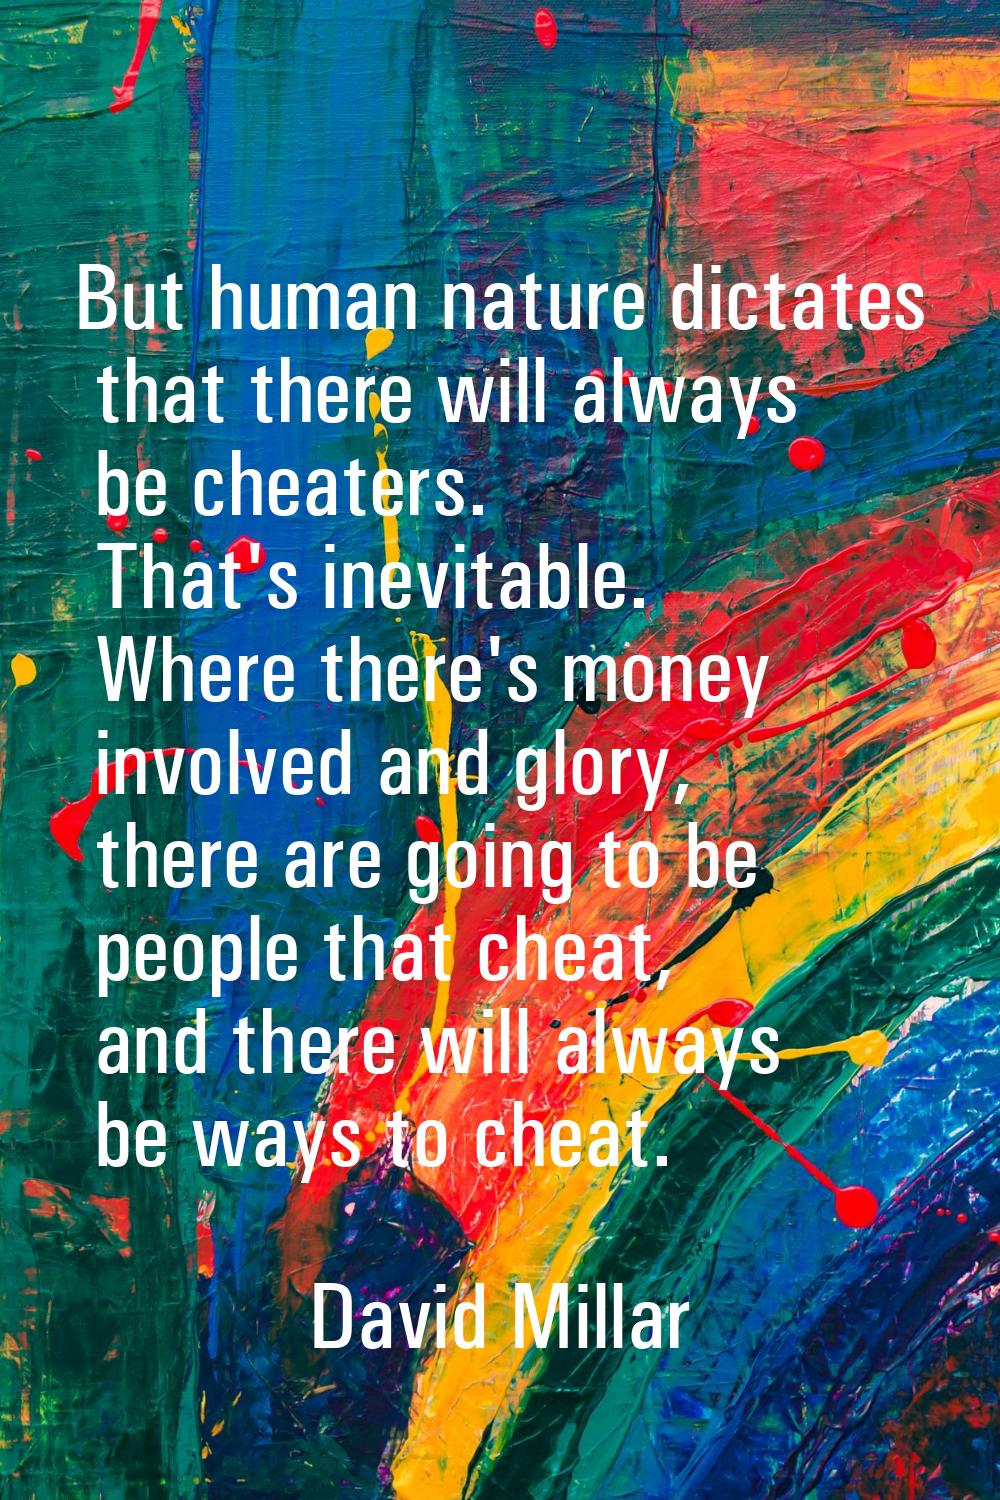 But human nature dictates that there will always be cheaters. That's inevitable. Where there's mone